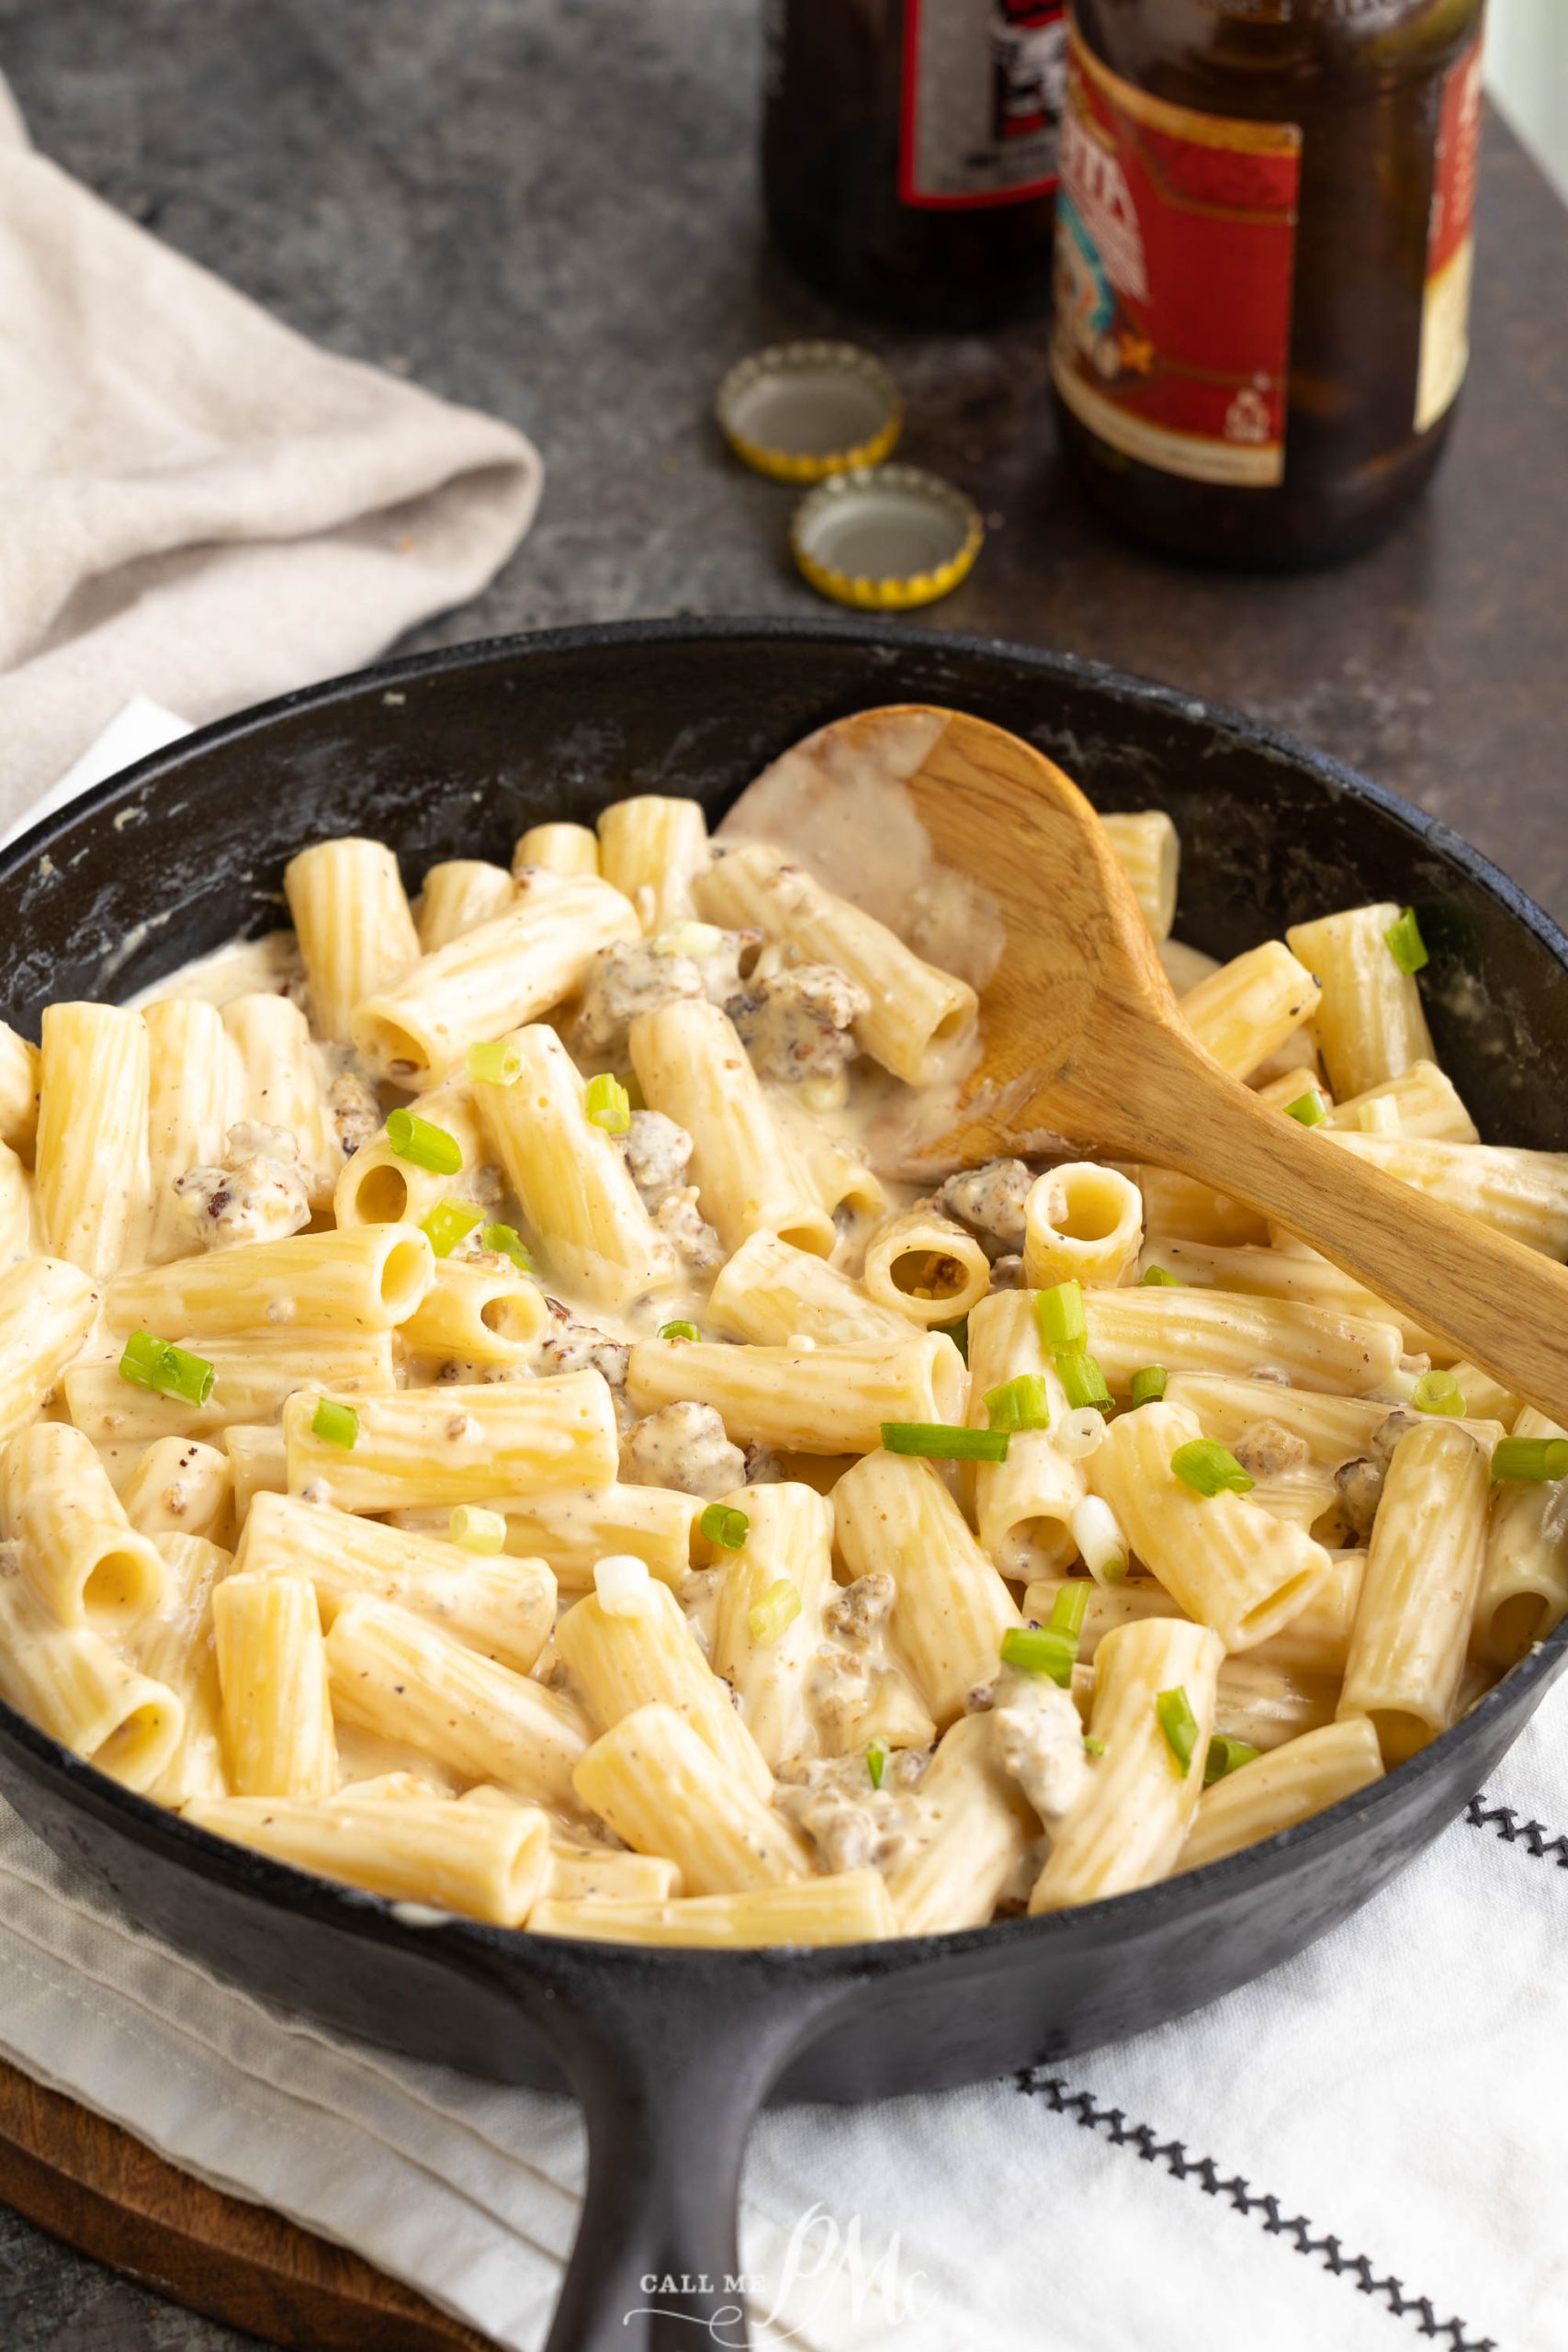 A skillet full of pasta with cheese and meat in it.